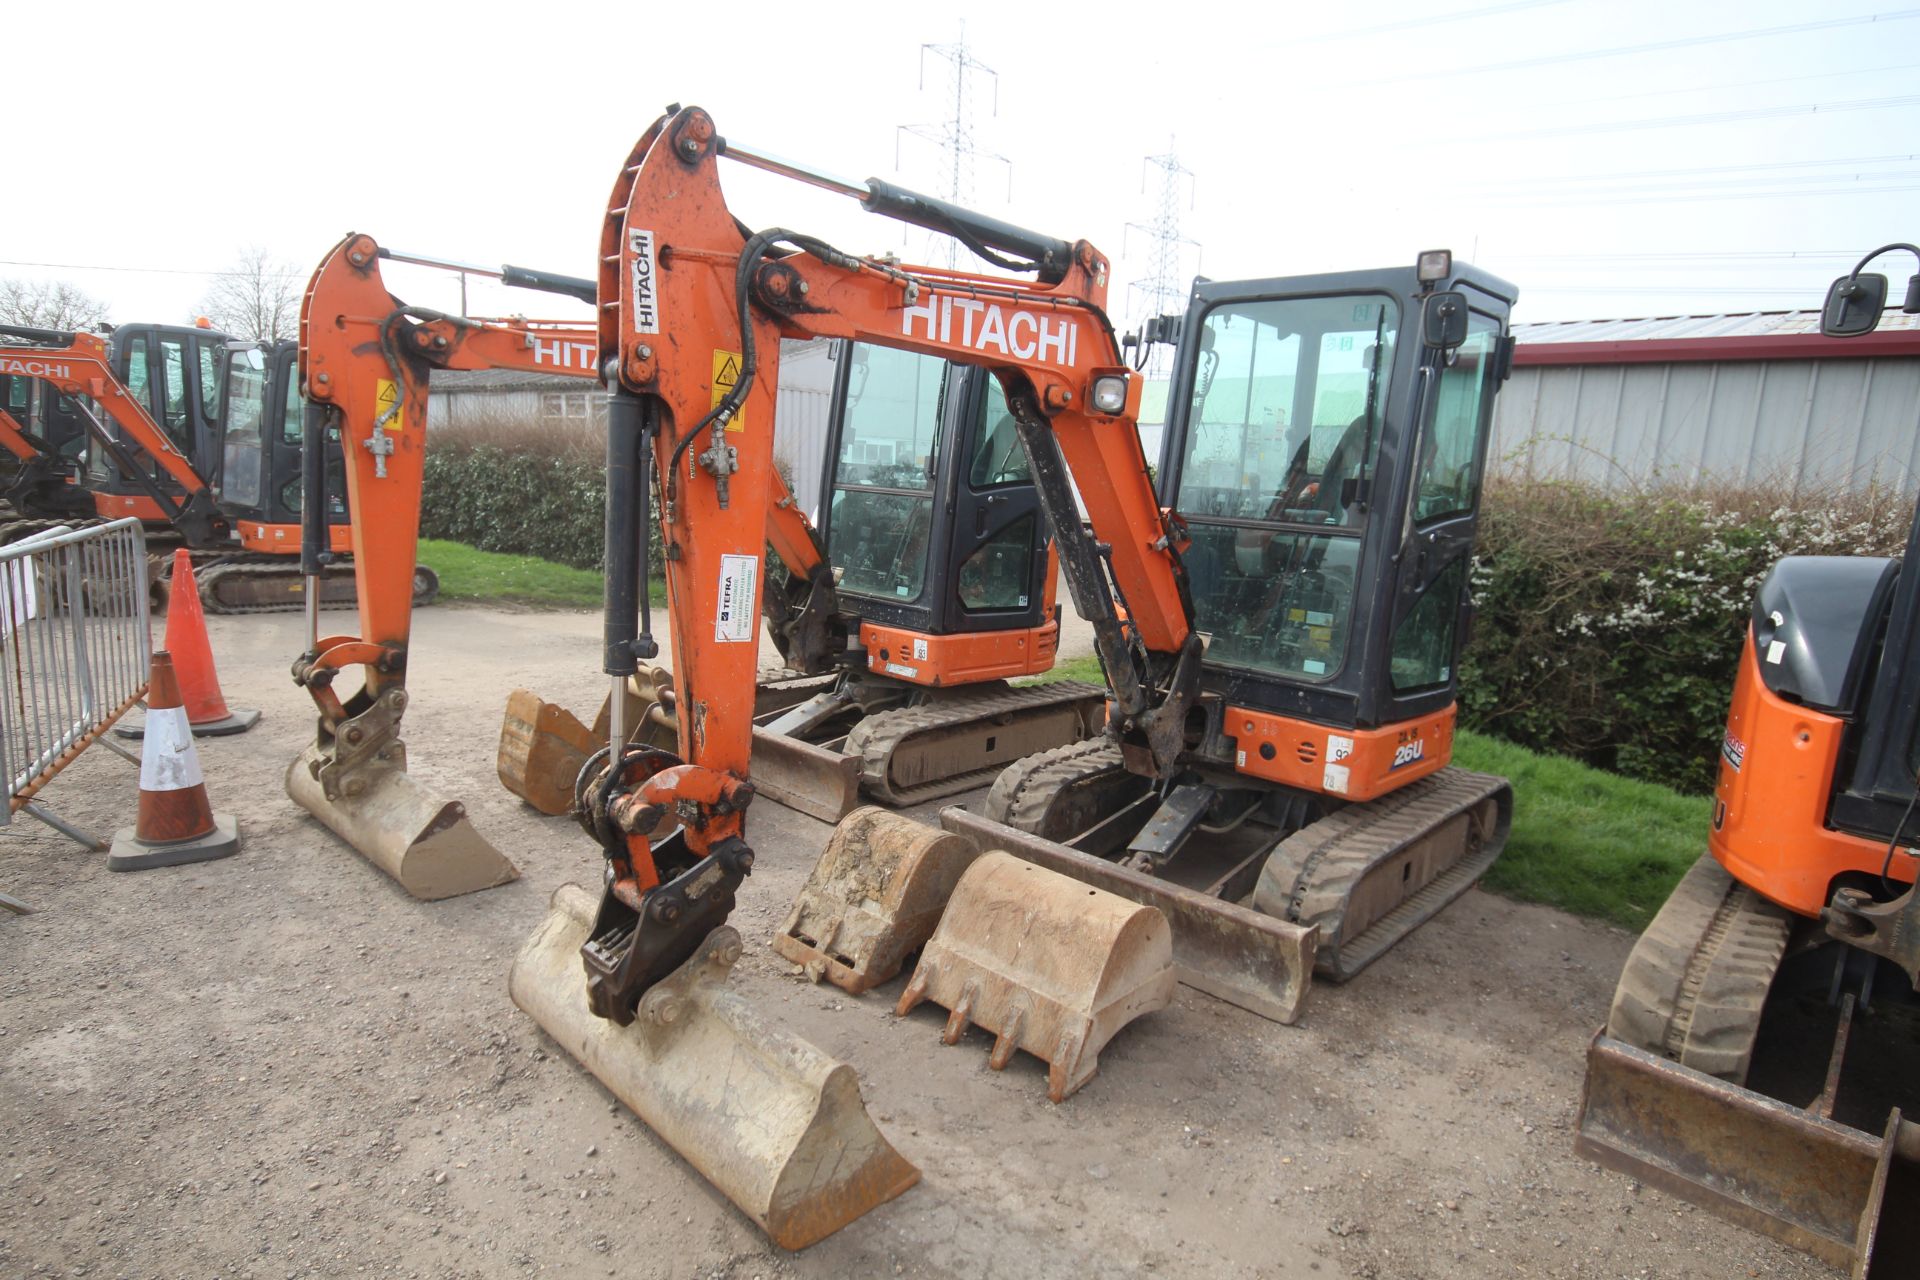 Hitachi Z-Axis 26U-5A CR 2.6T rubber track excavator. 2018. 3,000 hours. Serial number - Image 2 of 57